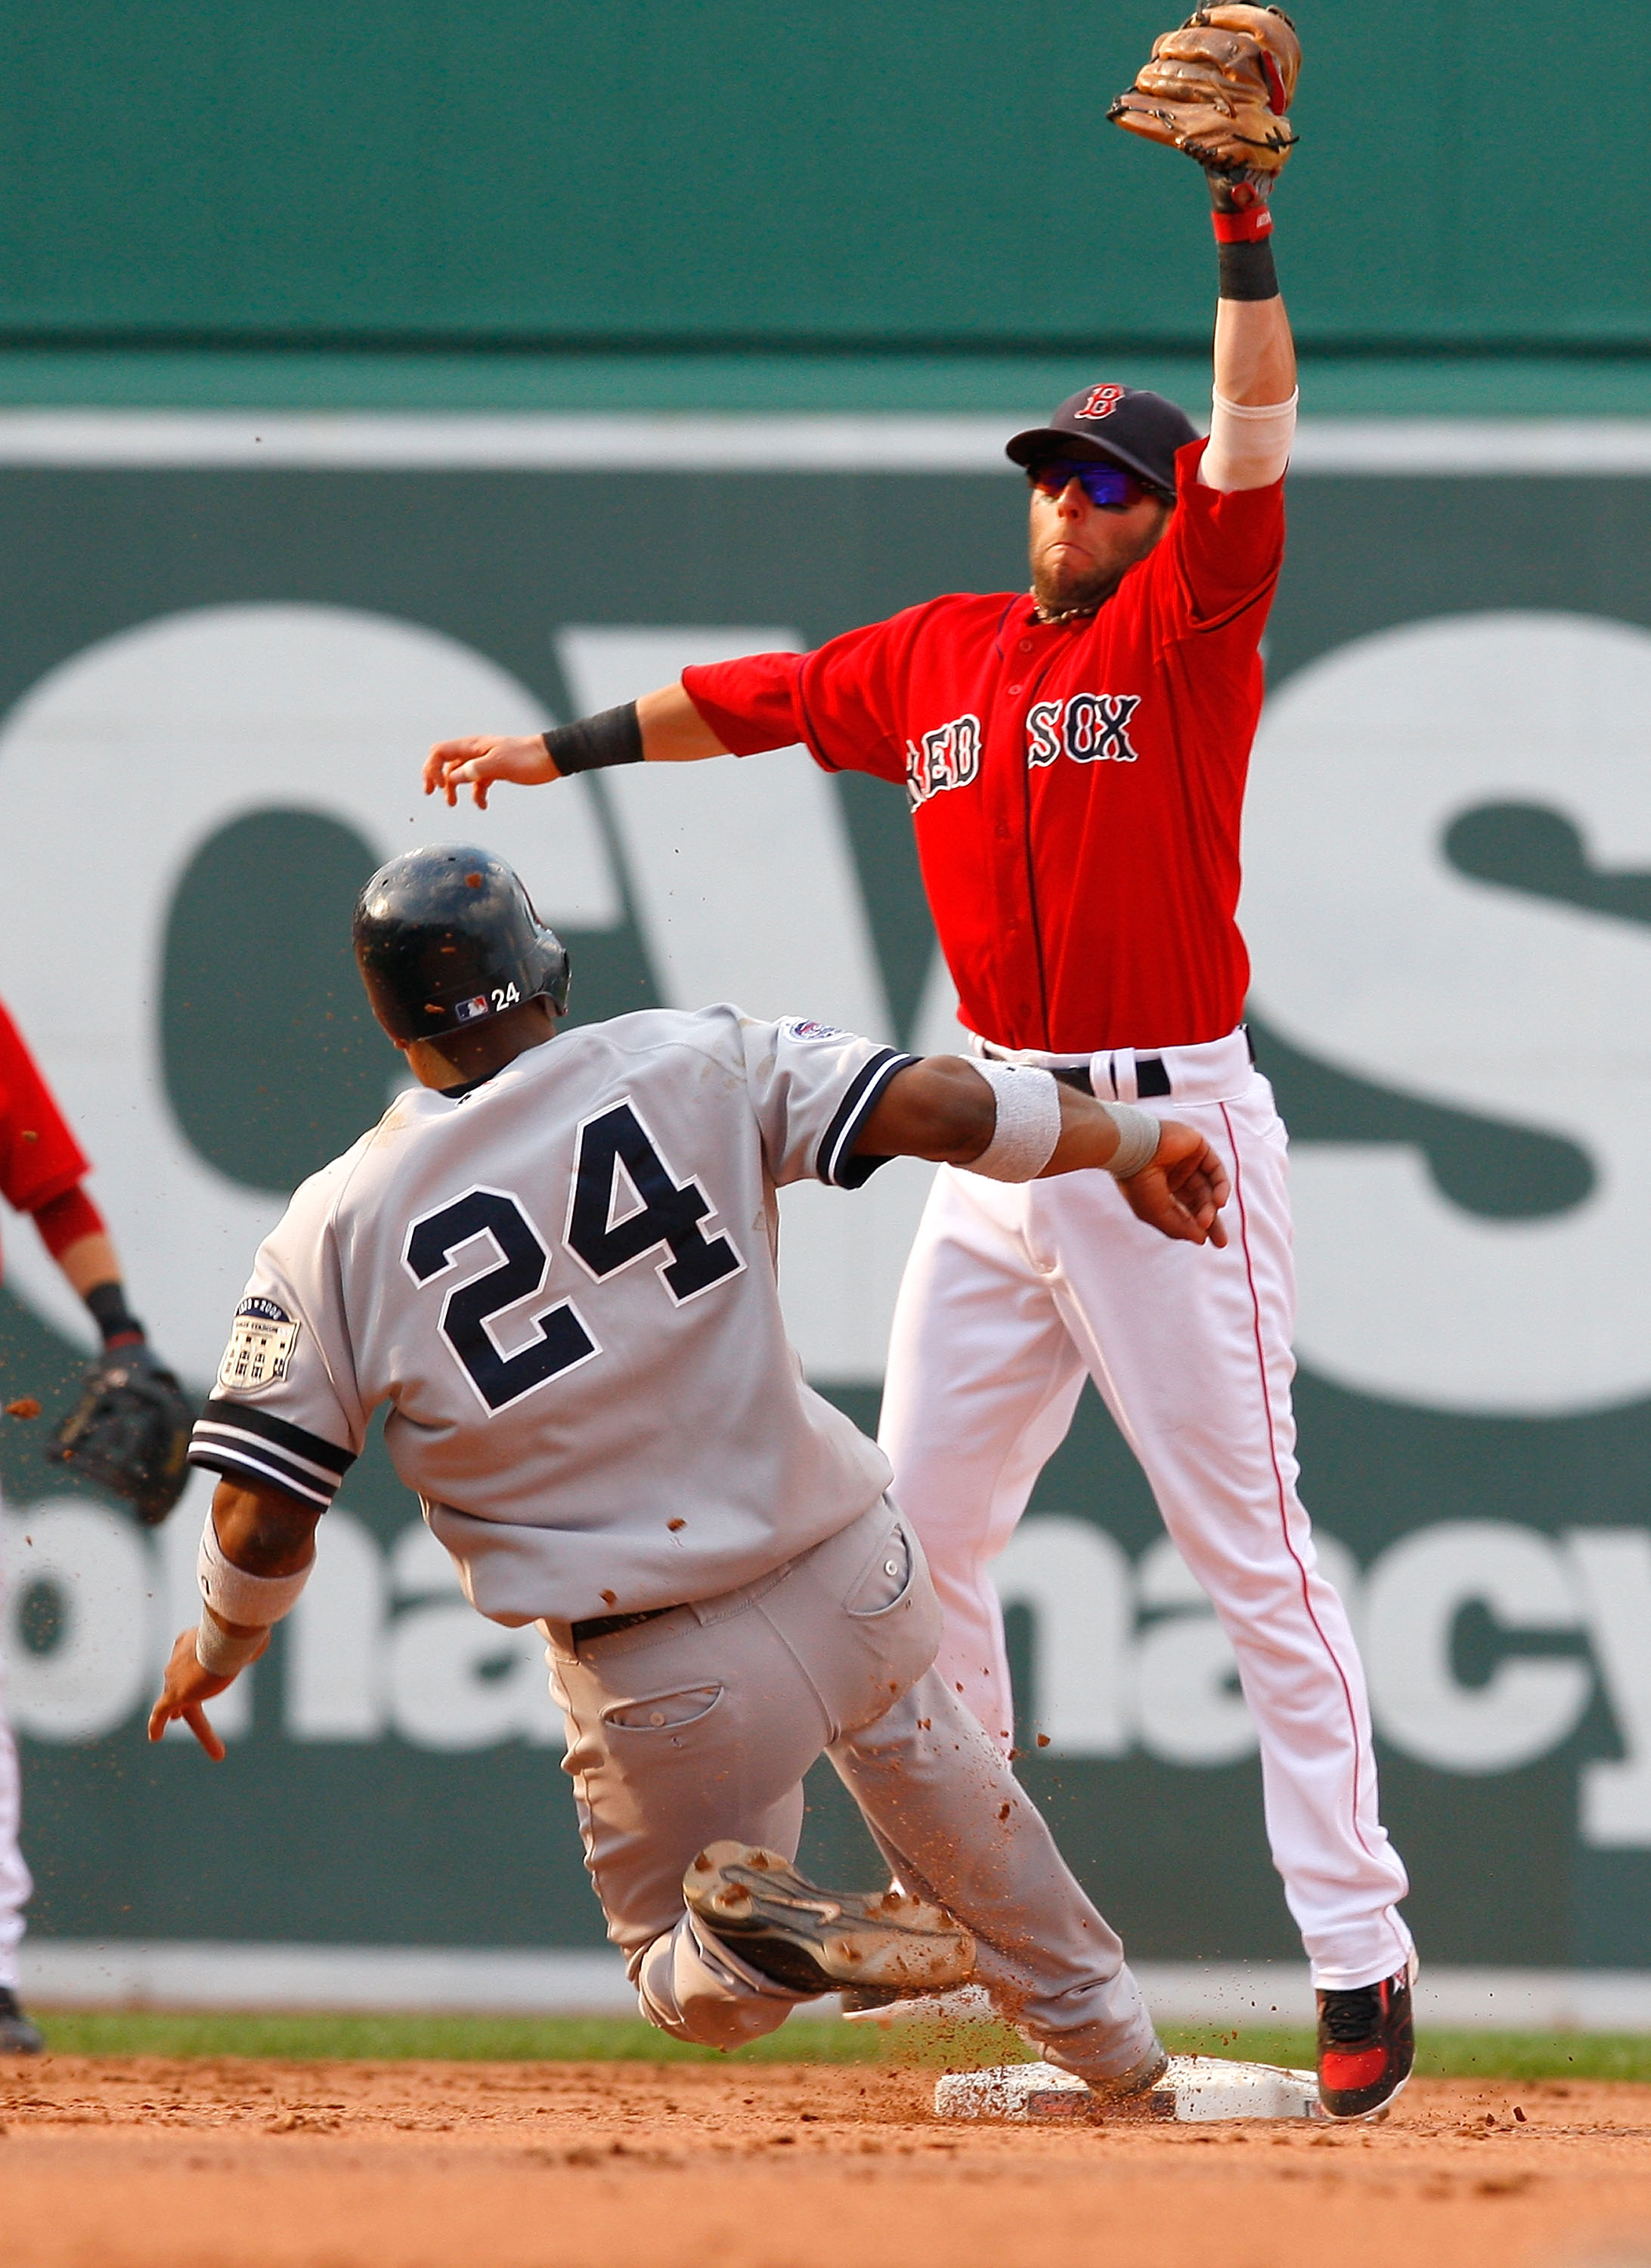 MVP Pedroia lights up Red Sox' clubhouse